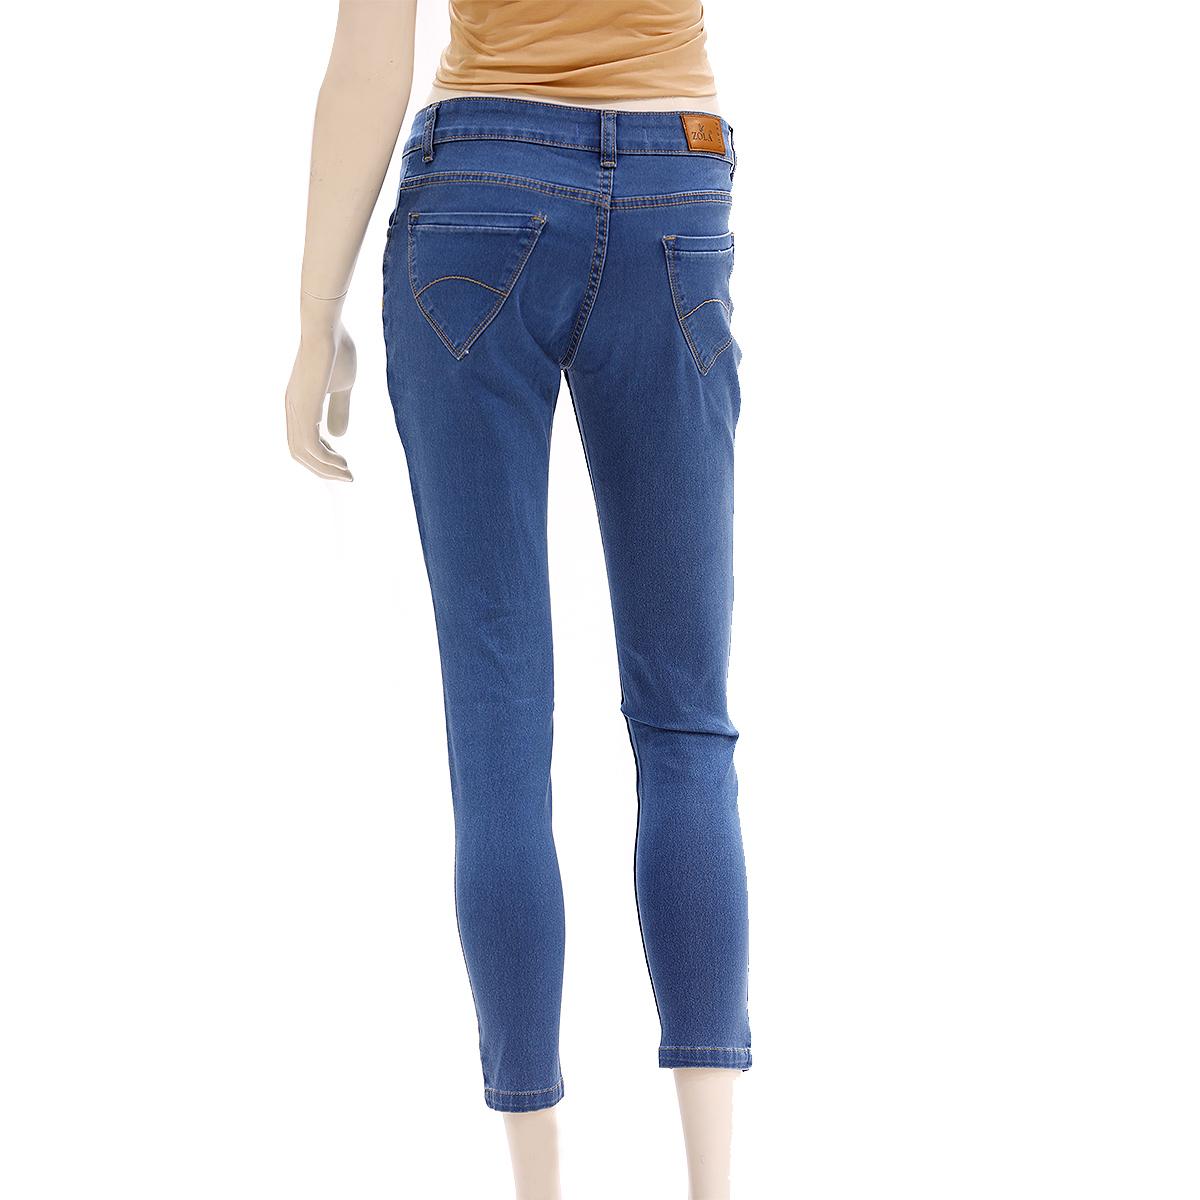 Zola Ankle Length Mid Waist Silky Finished Jeans With 1 Button Fly Front Zip Opening - Stone/Mid Blue, Size-36